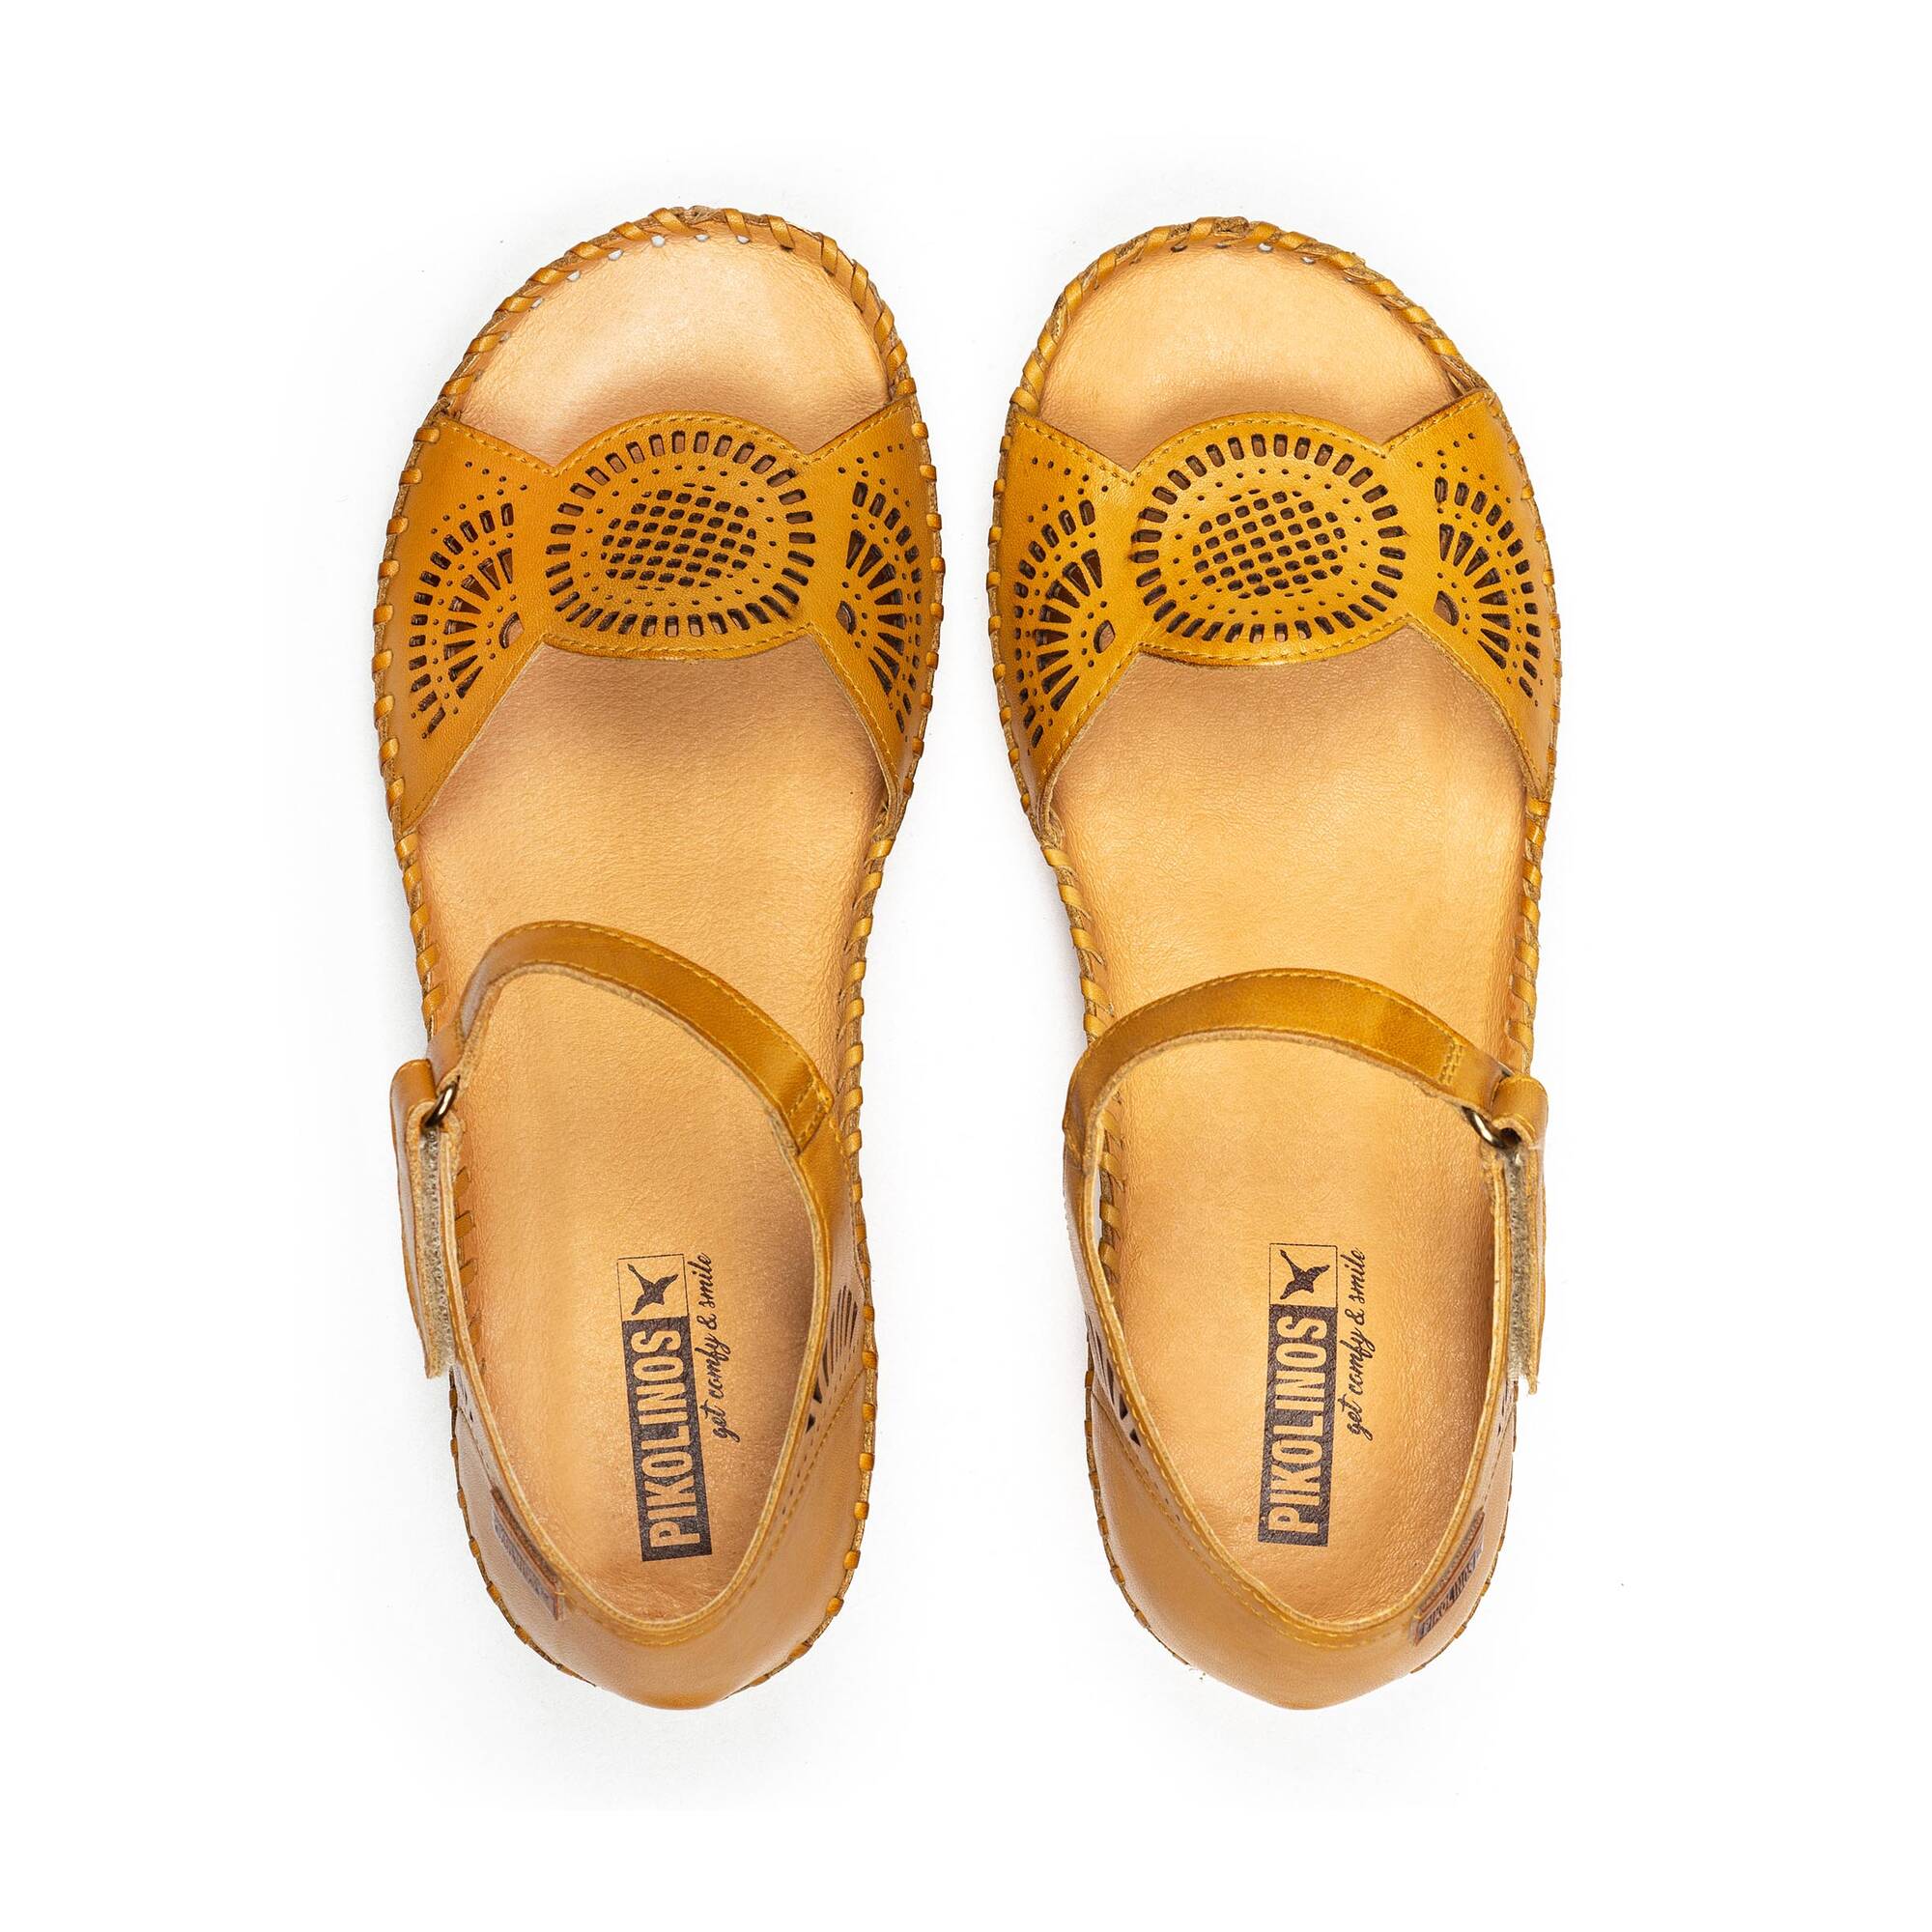 Sandals and Clogs | MARGARITA 943-1859, , large image number 100 | null